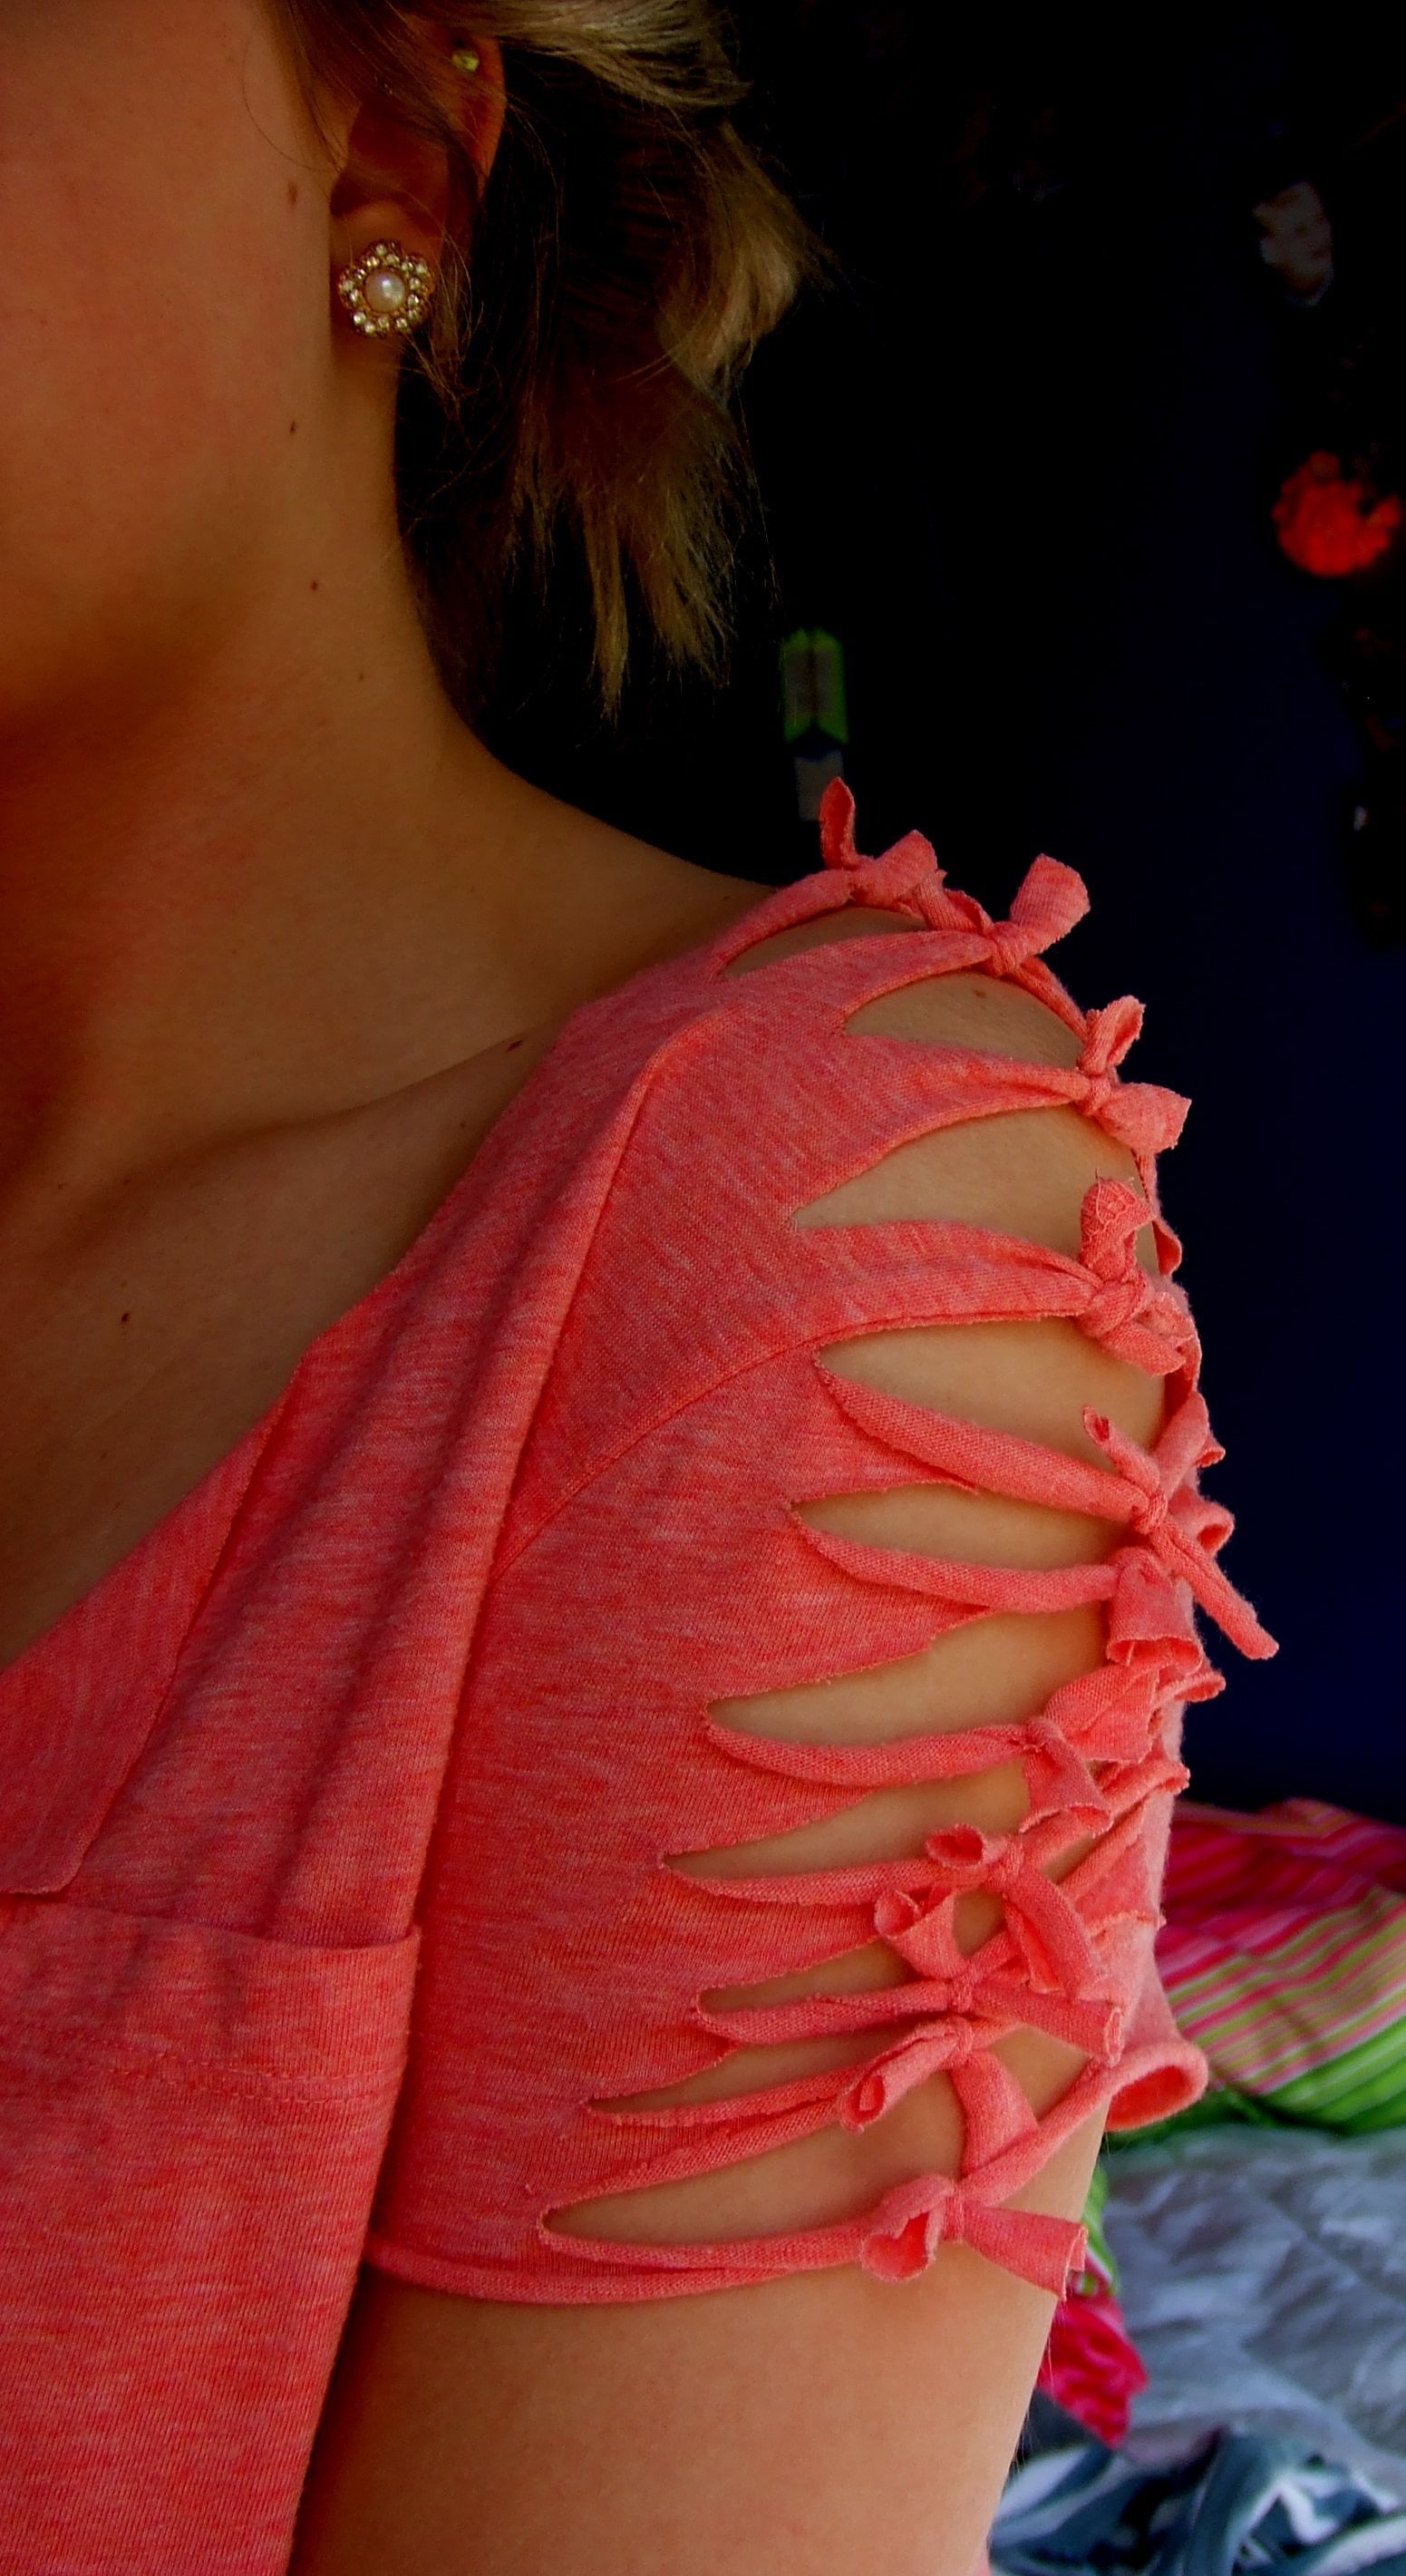 super easy DIY tribal sleeves… long sleeved would look awesome.(did this to an old black tee- turned out great)